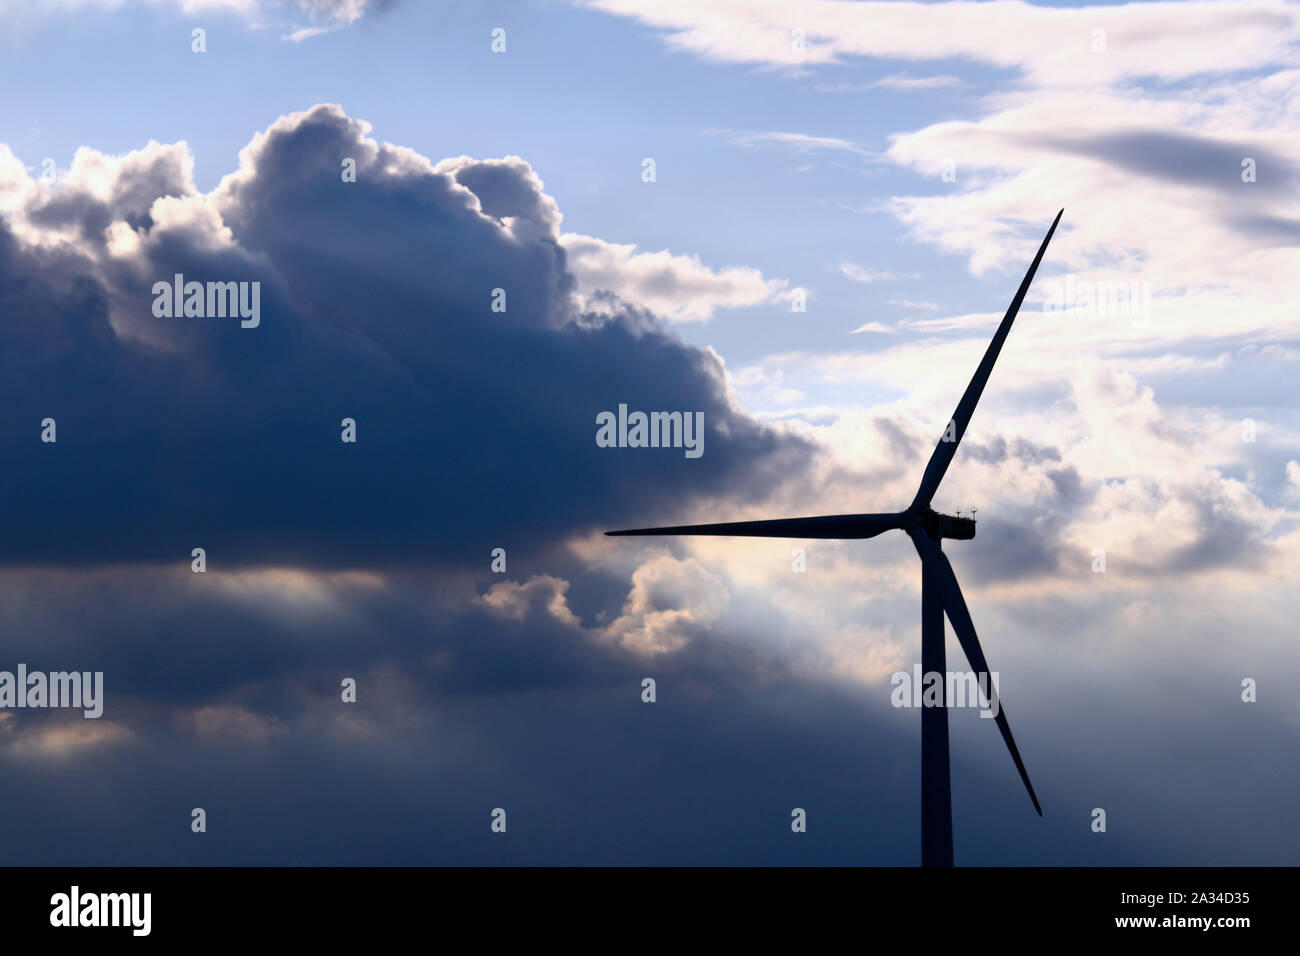 A wind power generator built in a dramatic sky Stock Photo